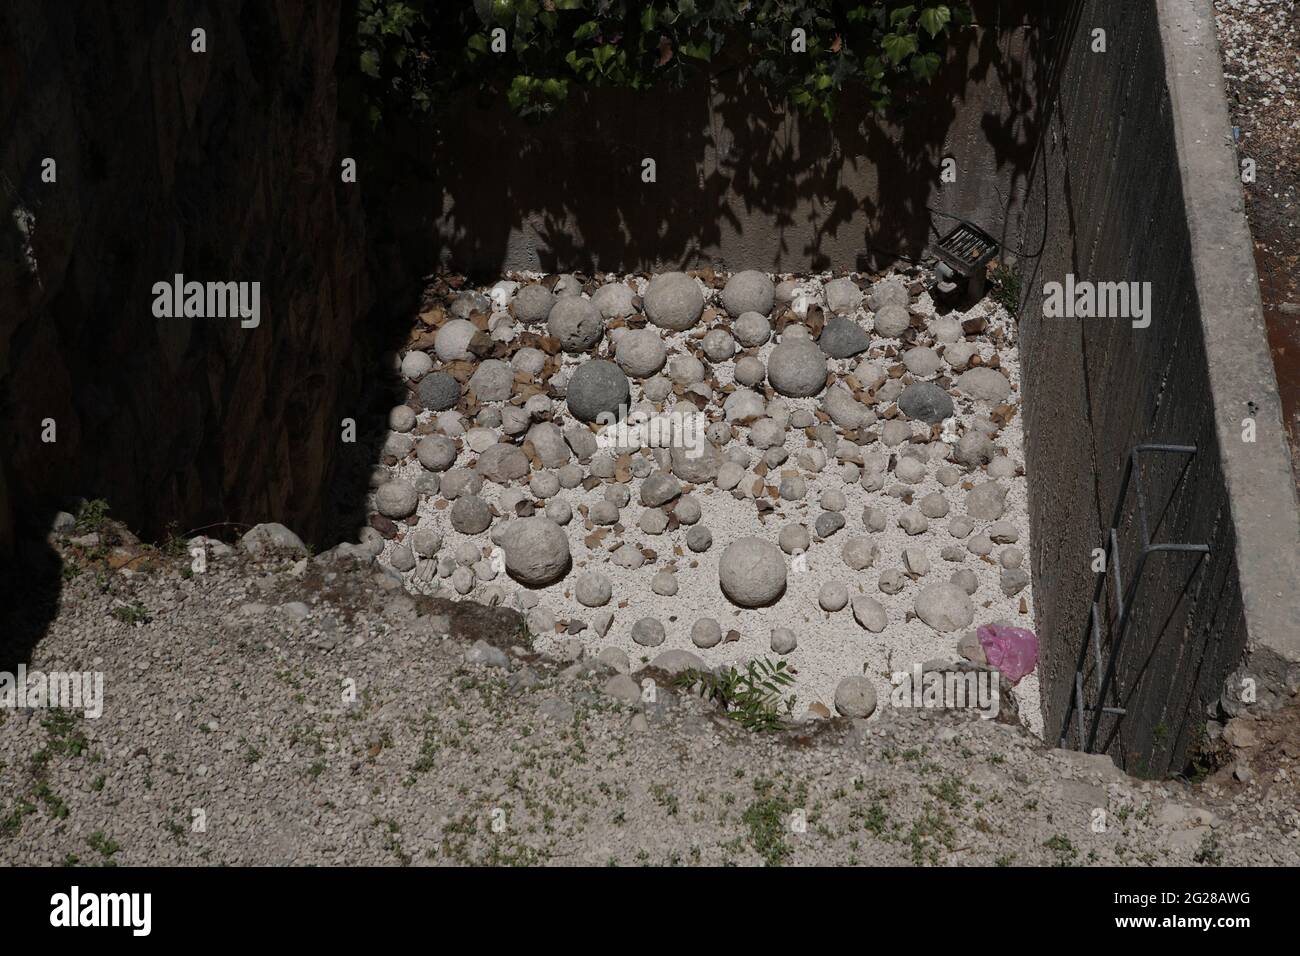 Catapult stones in the excavated area in David's Citadel, they were hurled with ballista by Greek Seleucids to pound the wall of Hasmonean Jerusalem. Stock Photo